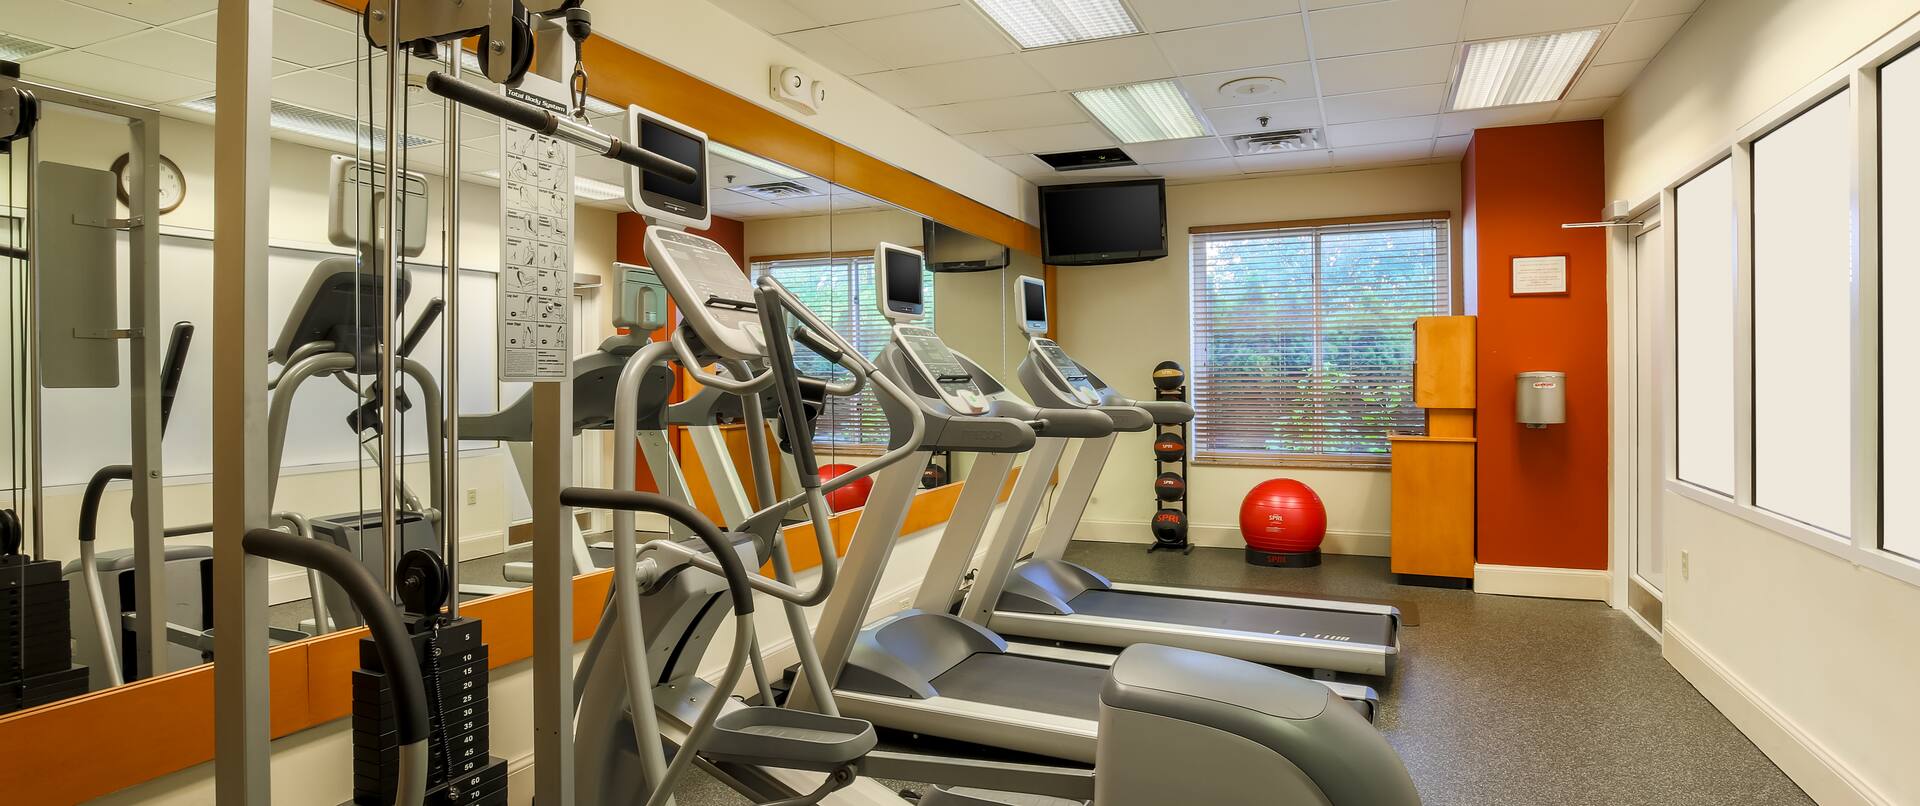 Fitness Center With Weight Machine, Cardio Equipment Facing Mirrored Wall, TV by Window, Weight Balls, and Exercise Ball